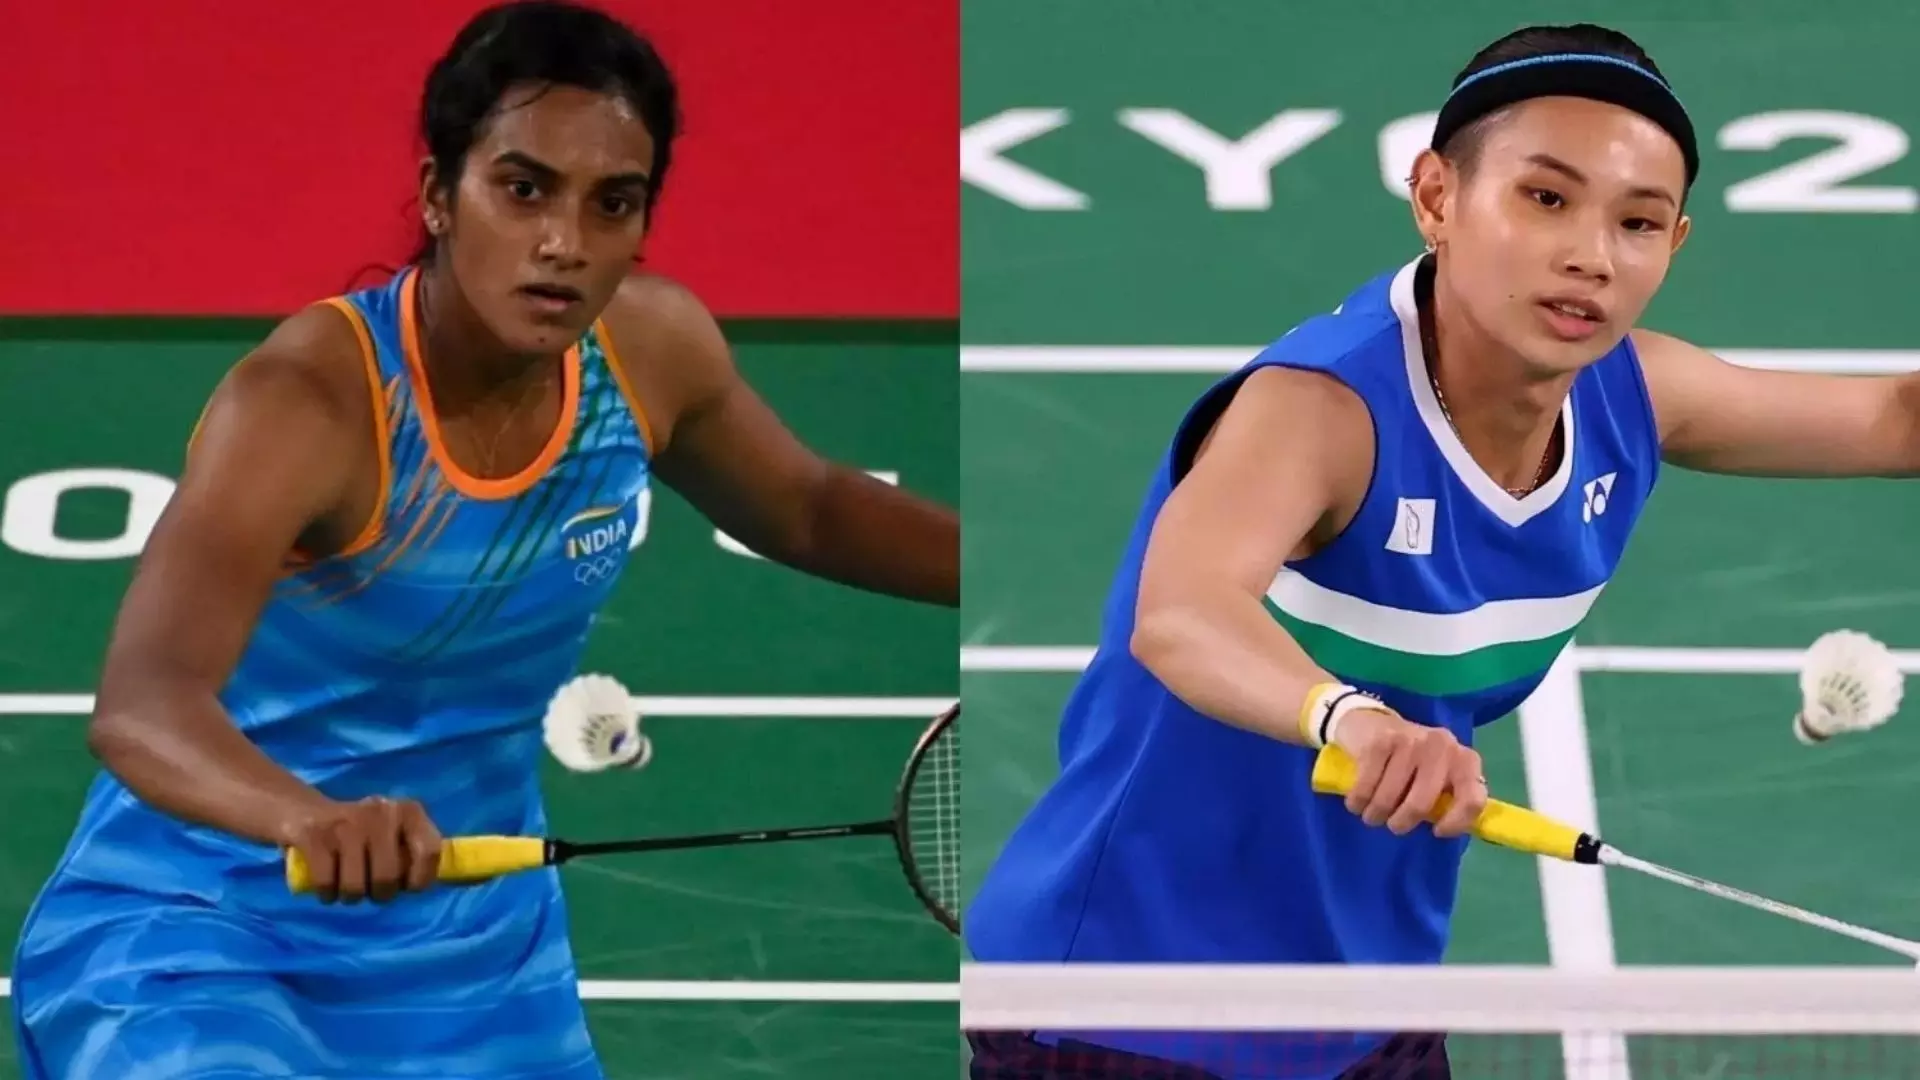 Indian Badminton Player PV Sindhu Consolation to T.Y. Tai to Loose in Final Olympic Badminton Match